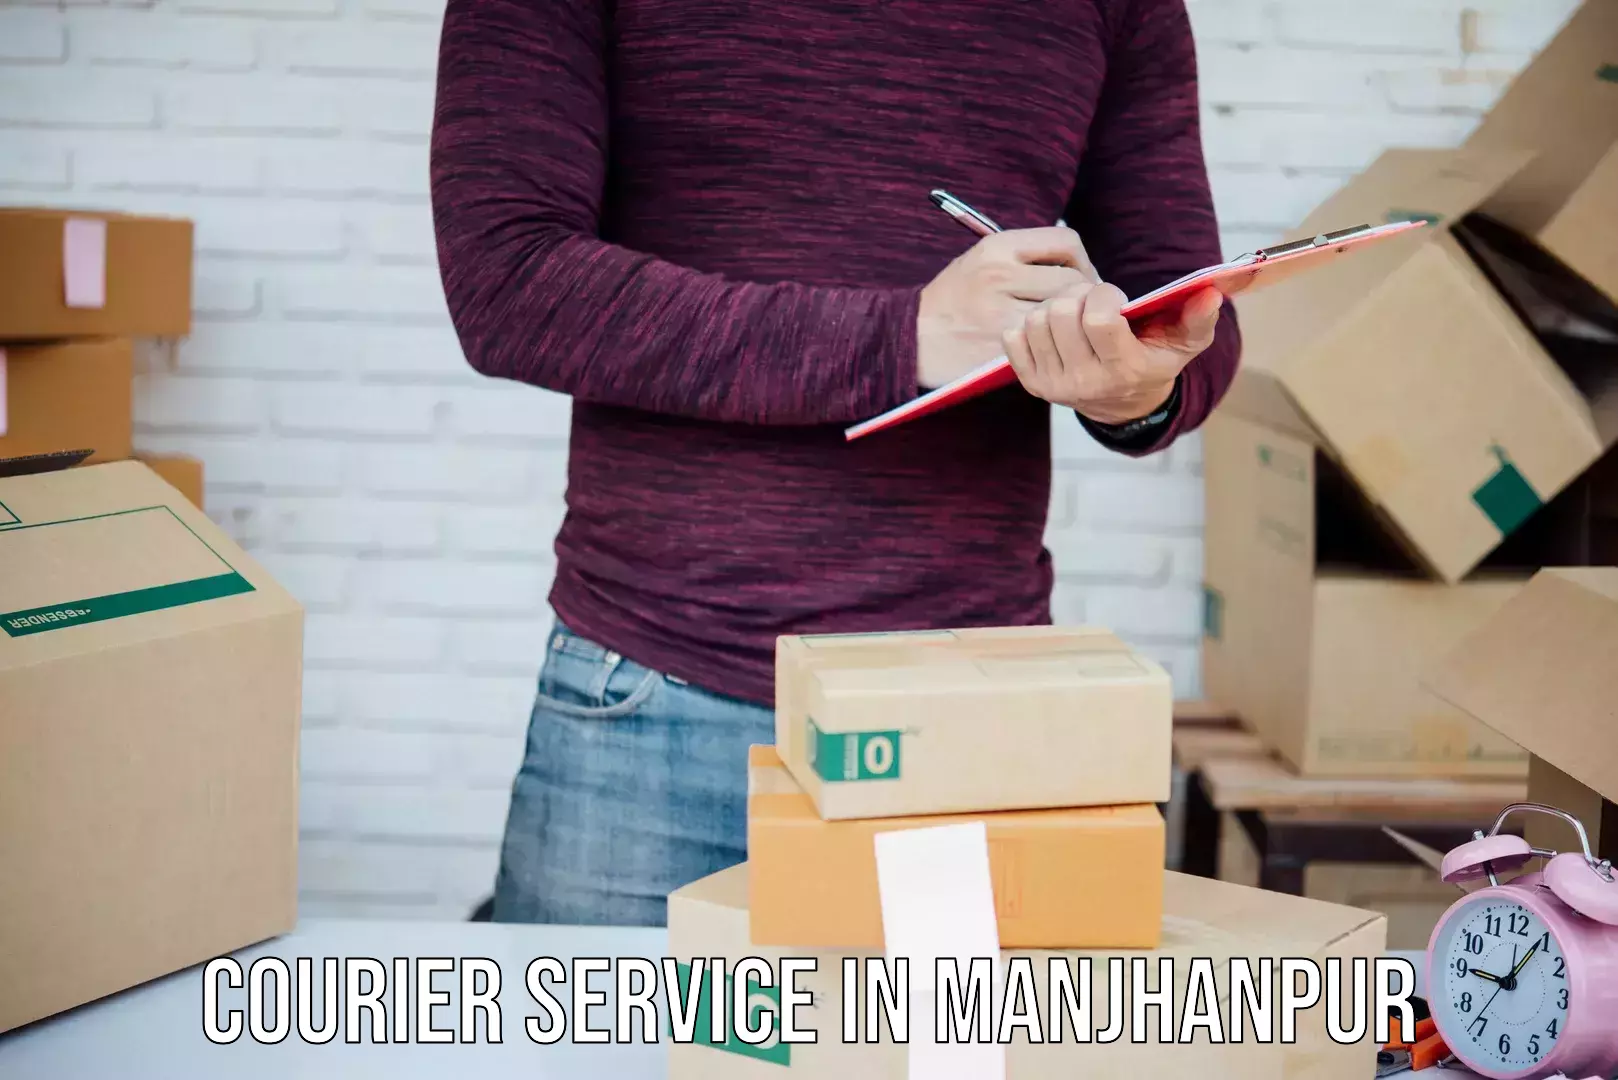 Customer-oriented courier services in Manjhanpur